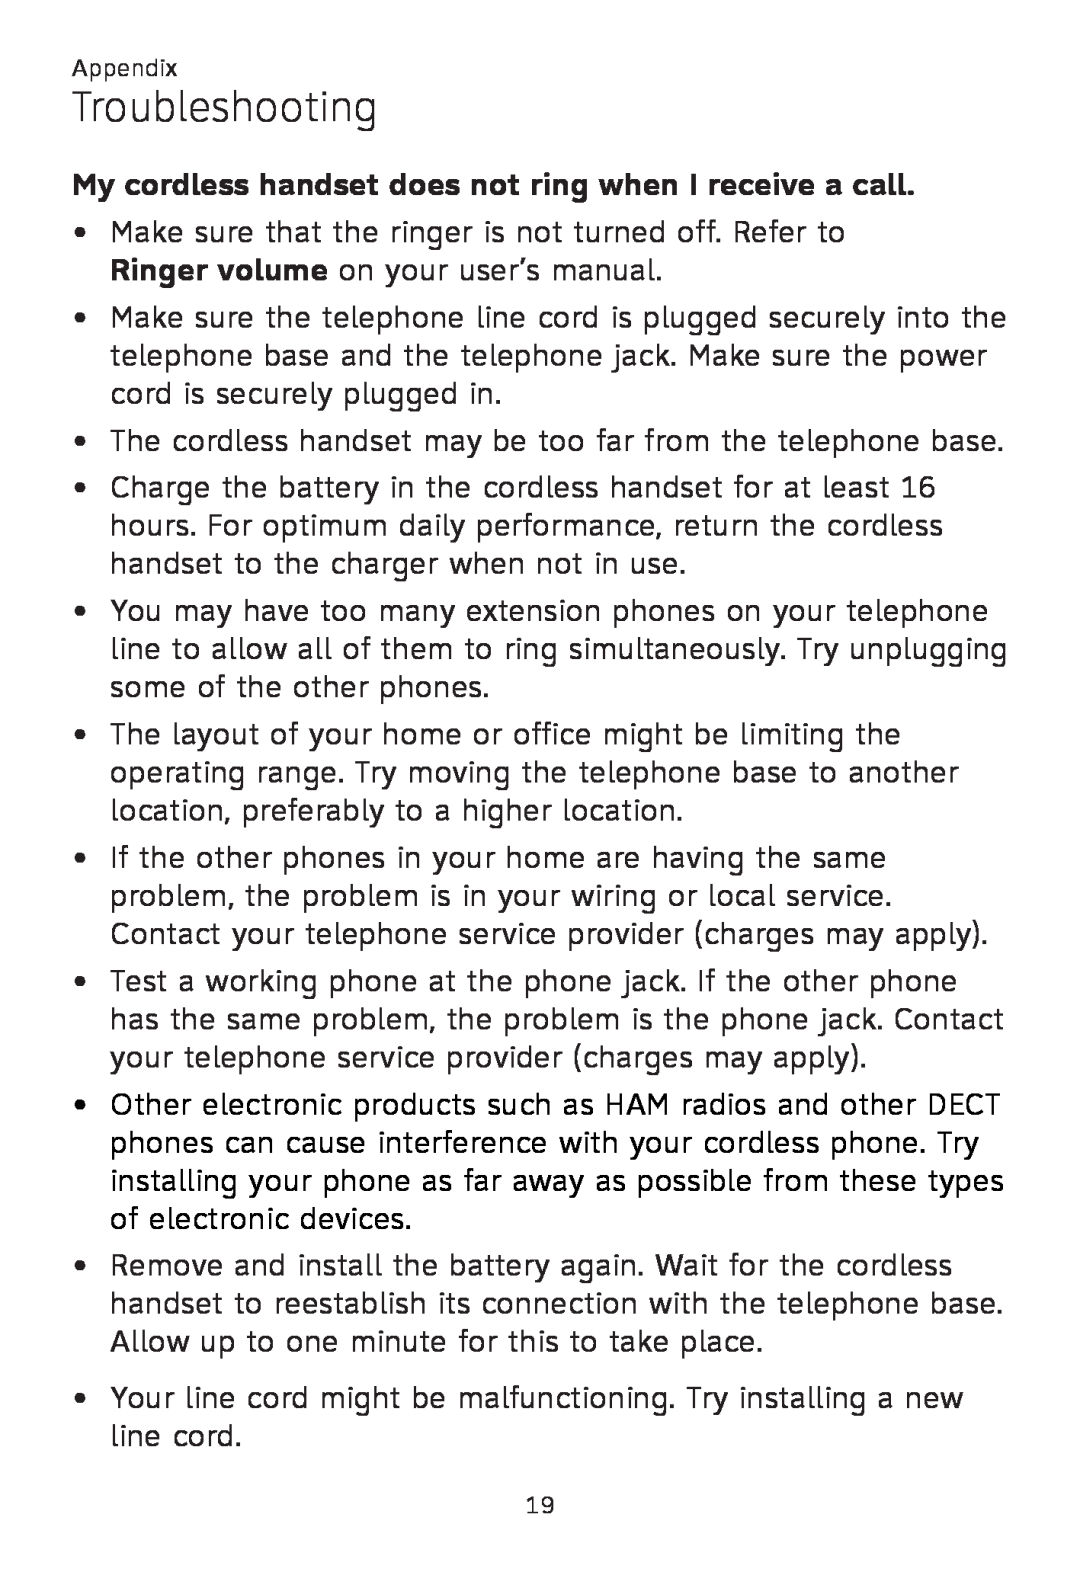 AT&T TL 86009, TL86109, TL86009 user manual My cordless handset does not ring when I receive a call, Troubleshooting 